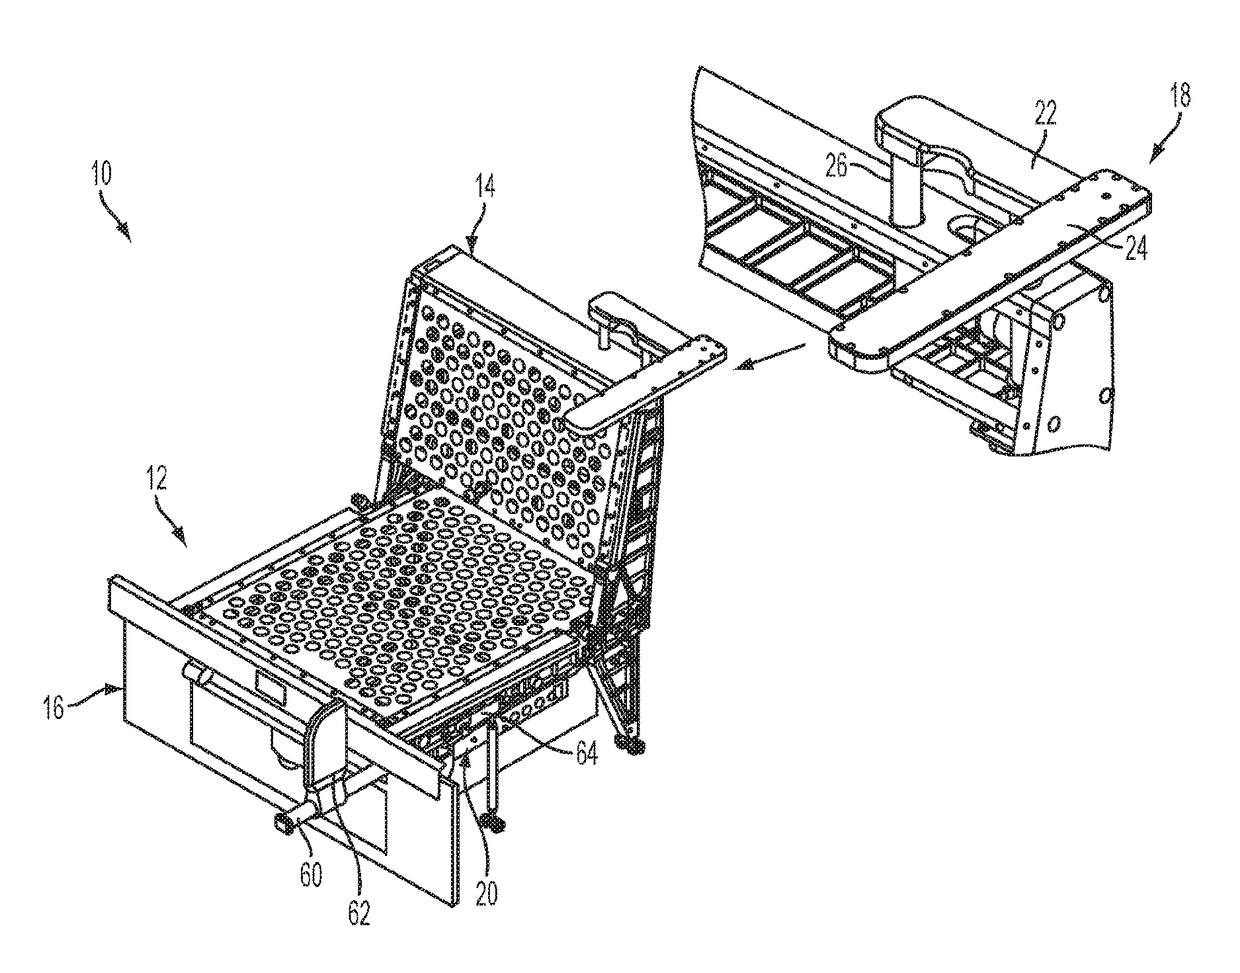 Passive occupant restraint for side-facing aircraft seats